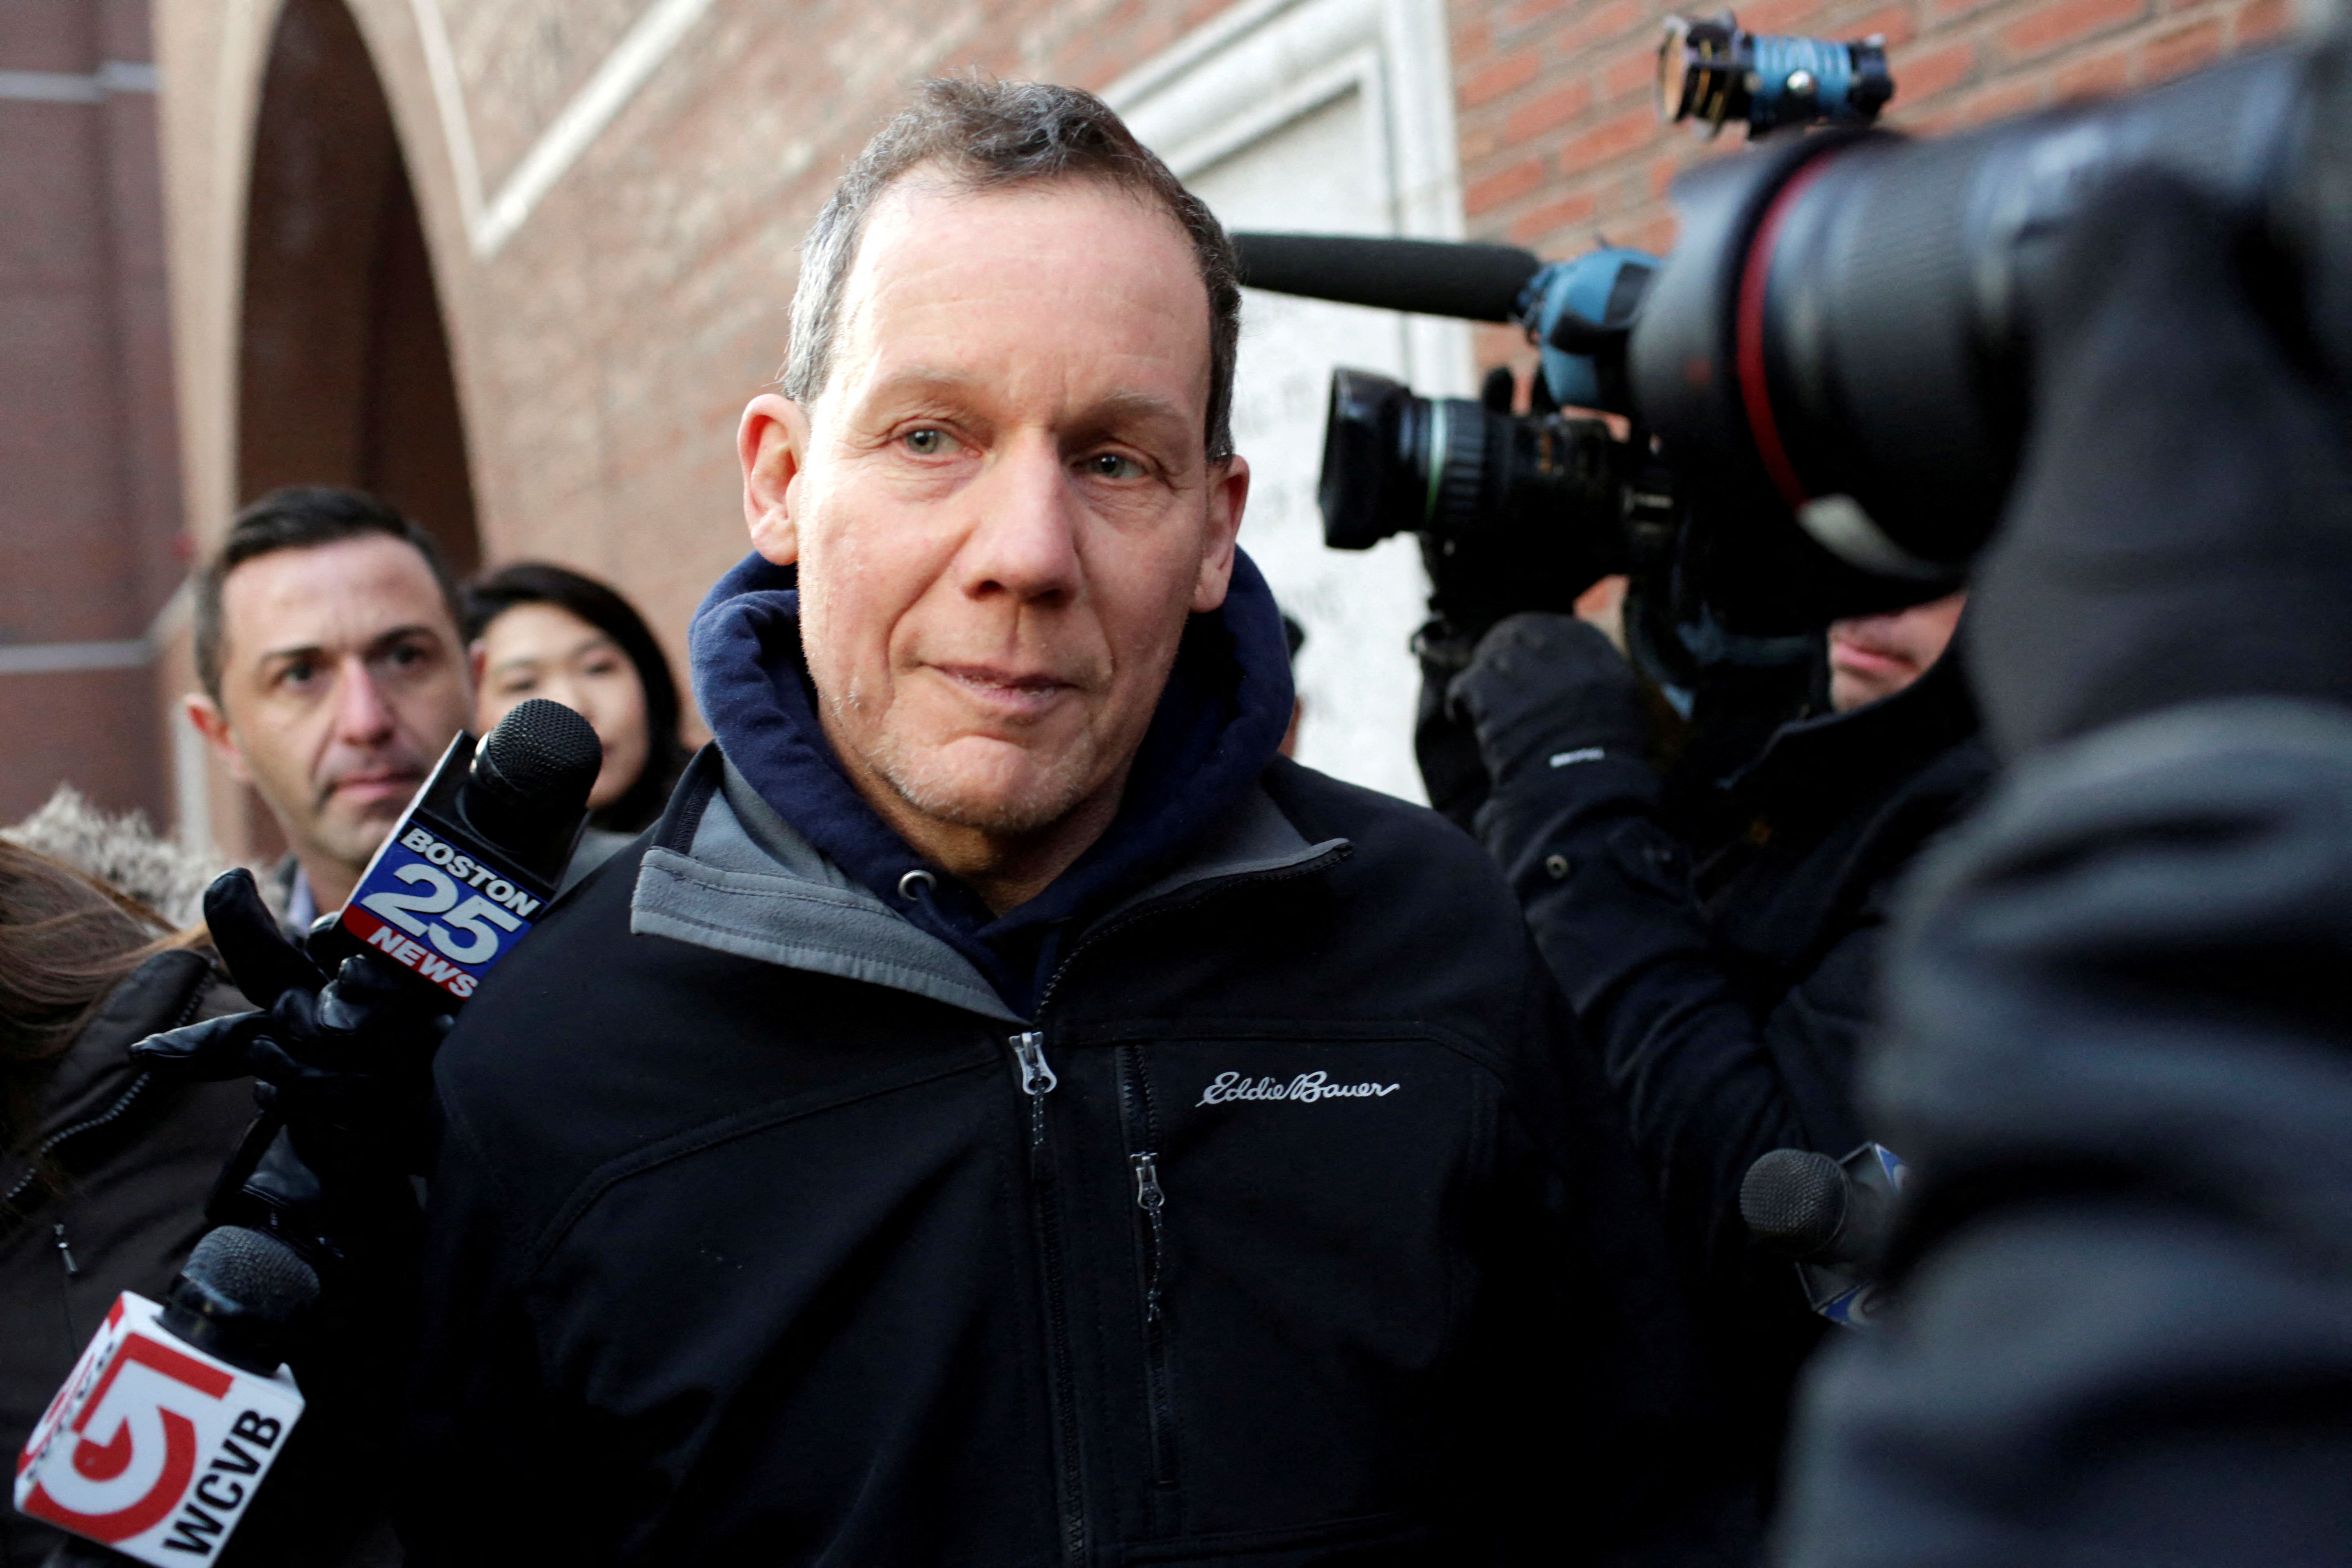 Charles Lieber leaves federal court after he and two Chinese nationals were charged with lying about their alleged links to the Chinese government, in Boston, Massachusetts, U.S. January 30, 2020.  REUTERS/Katherine Taylor